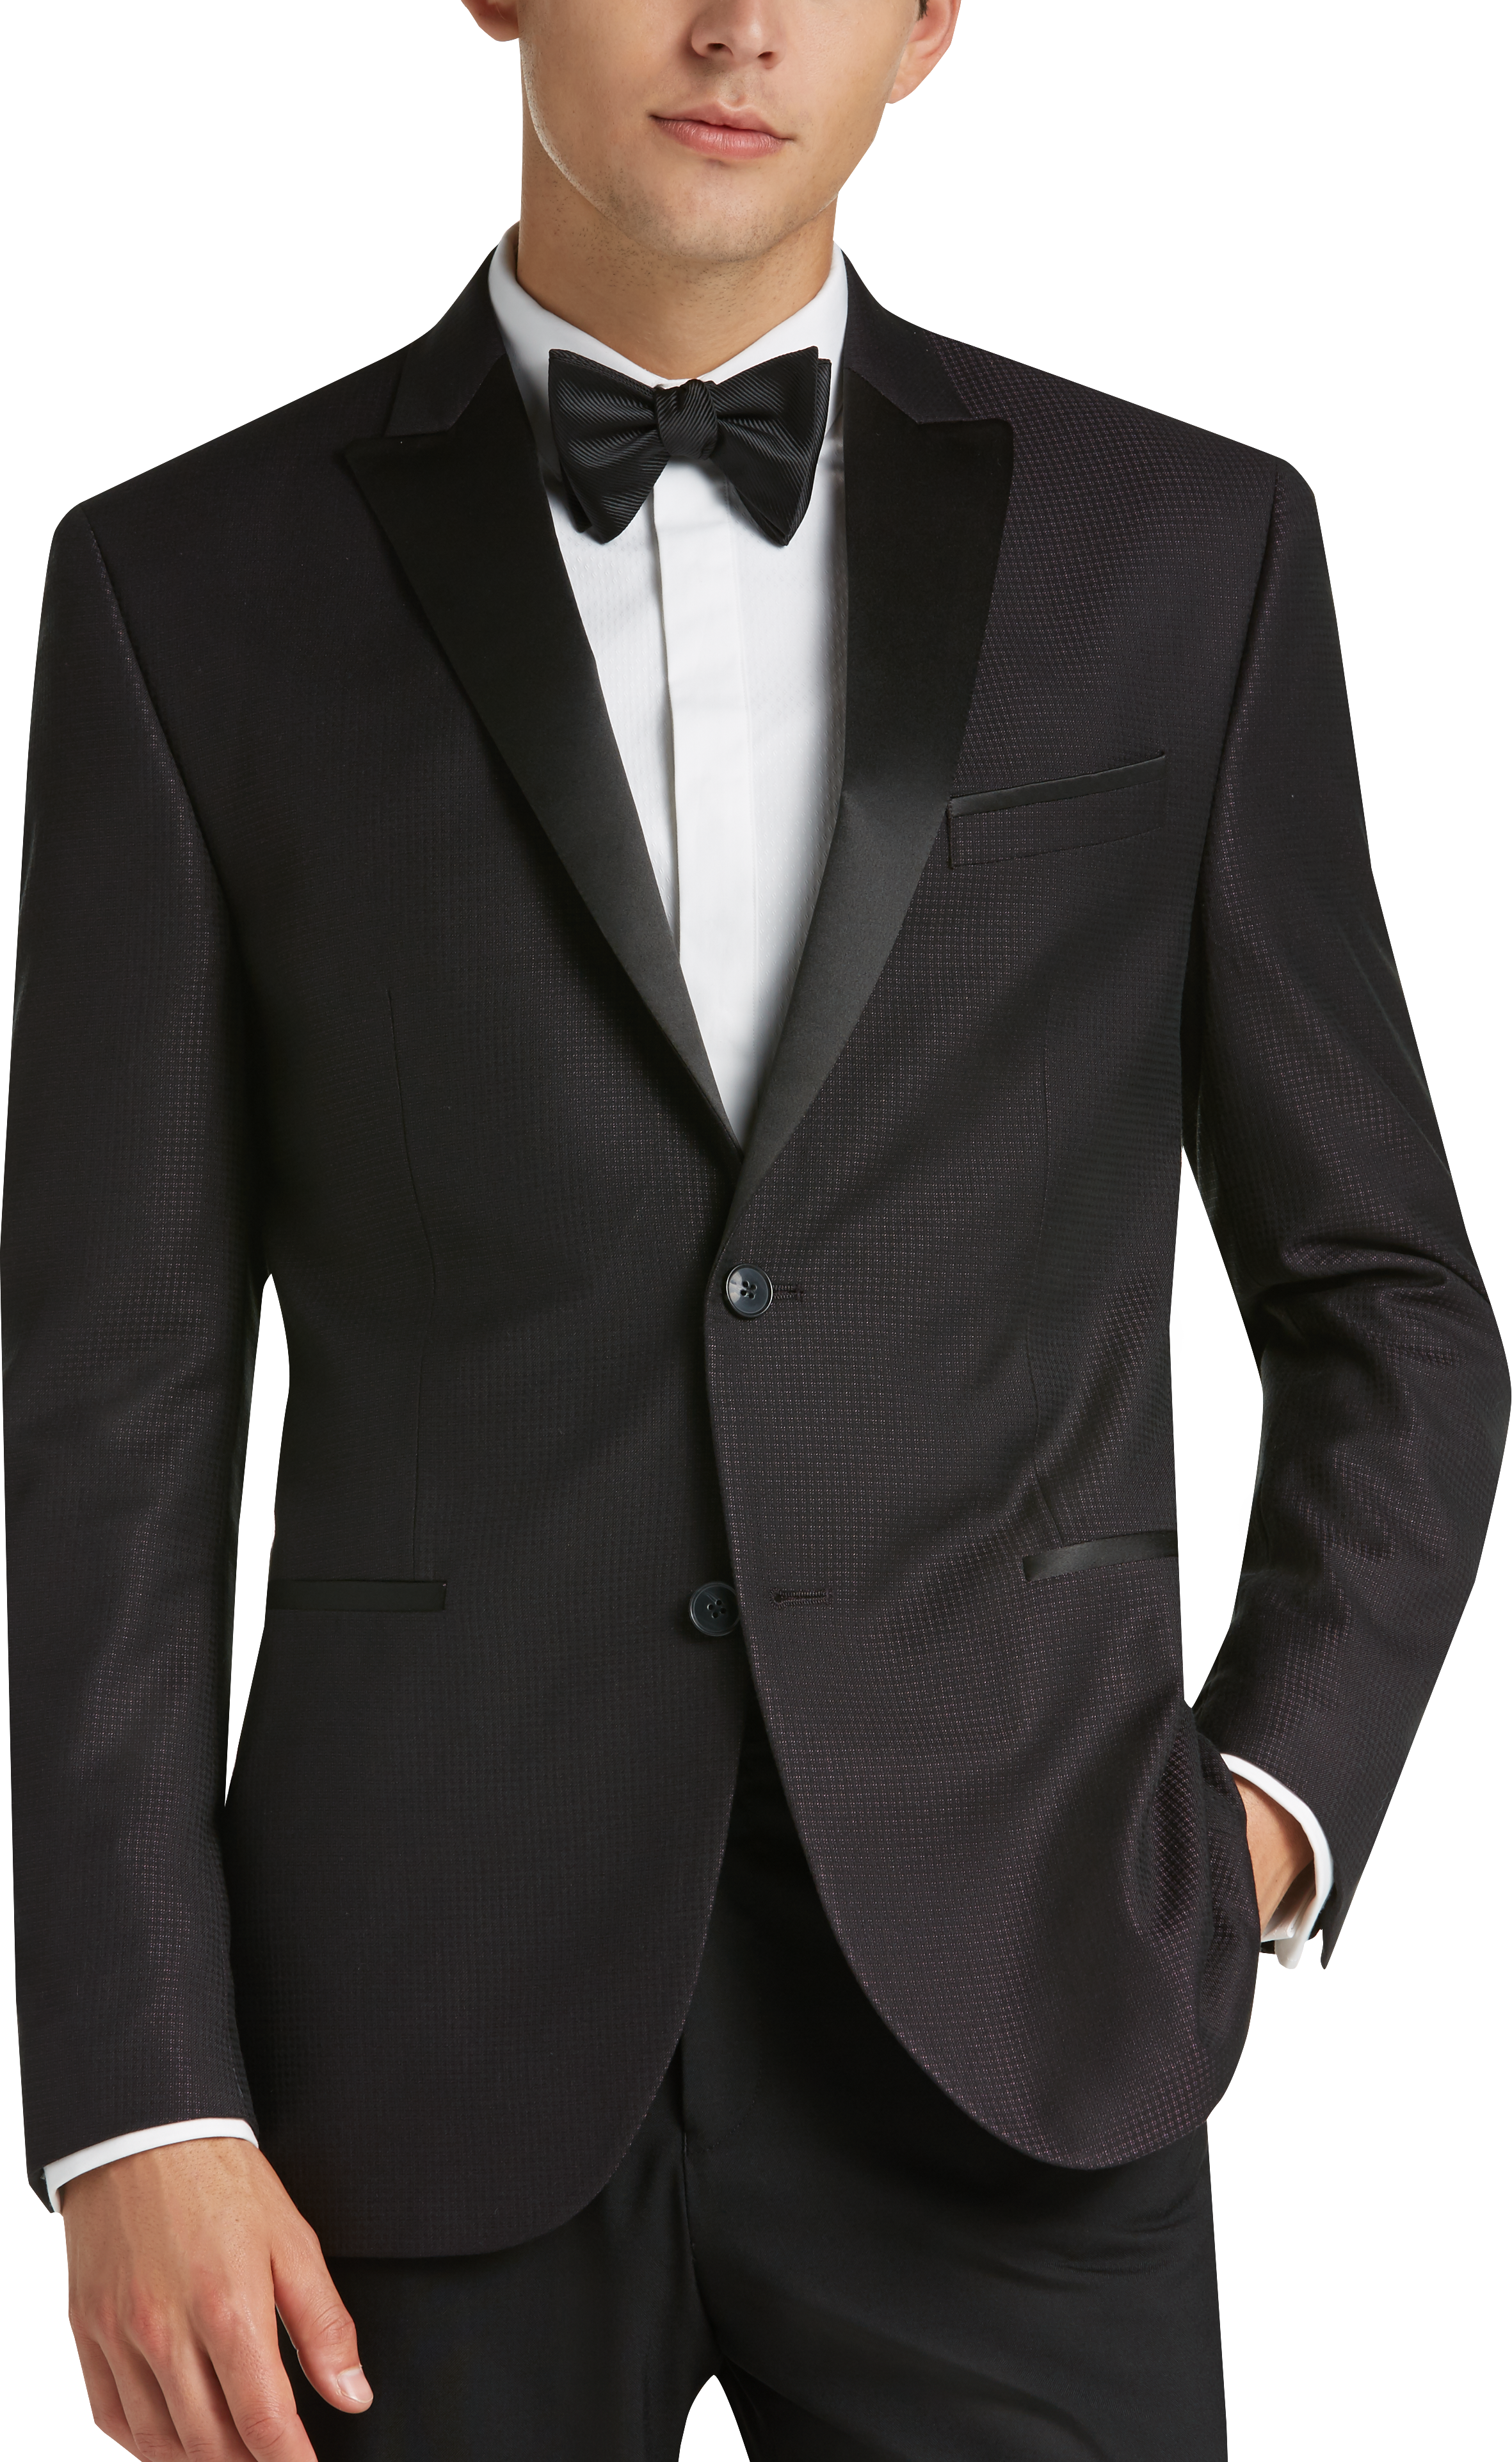 Awearness Kenneth Cole Plum Slim Fit Dinner Jacket - Men's Tuxedos ...